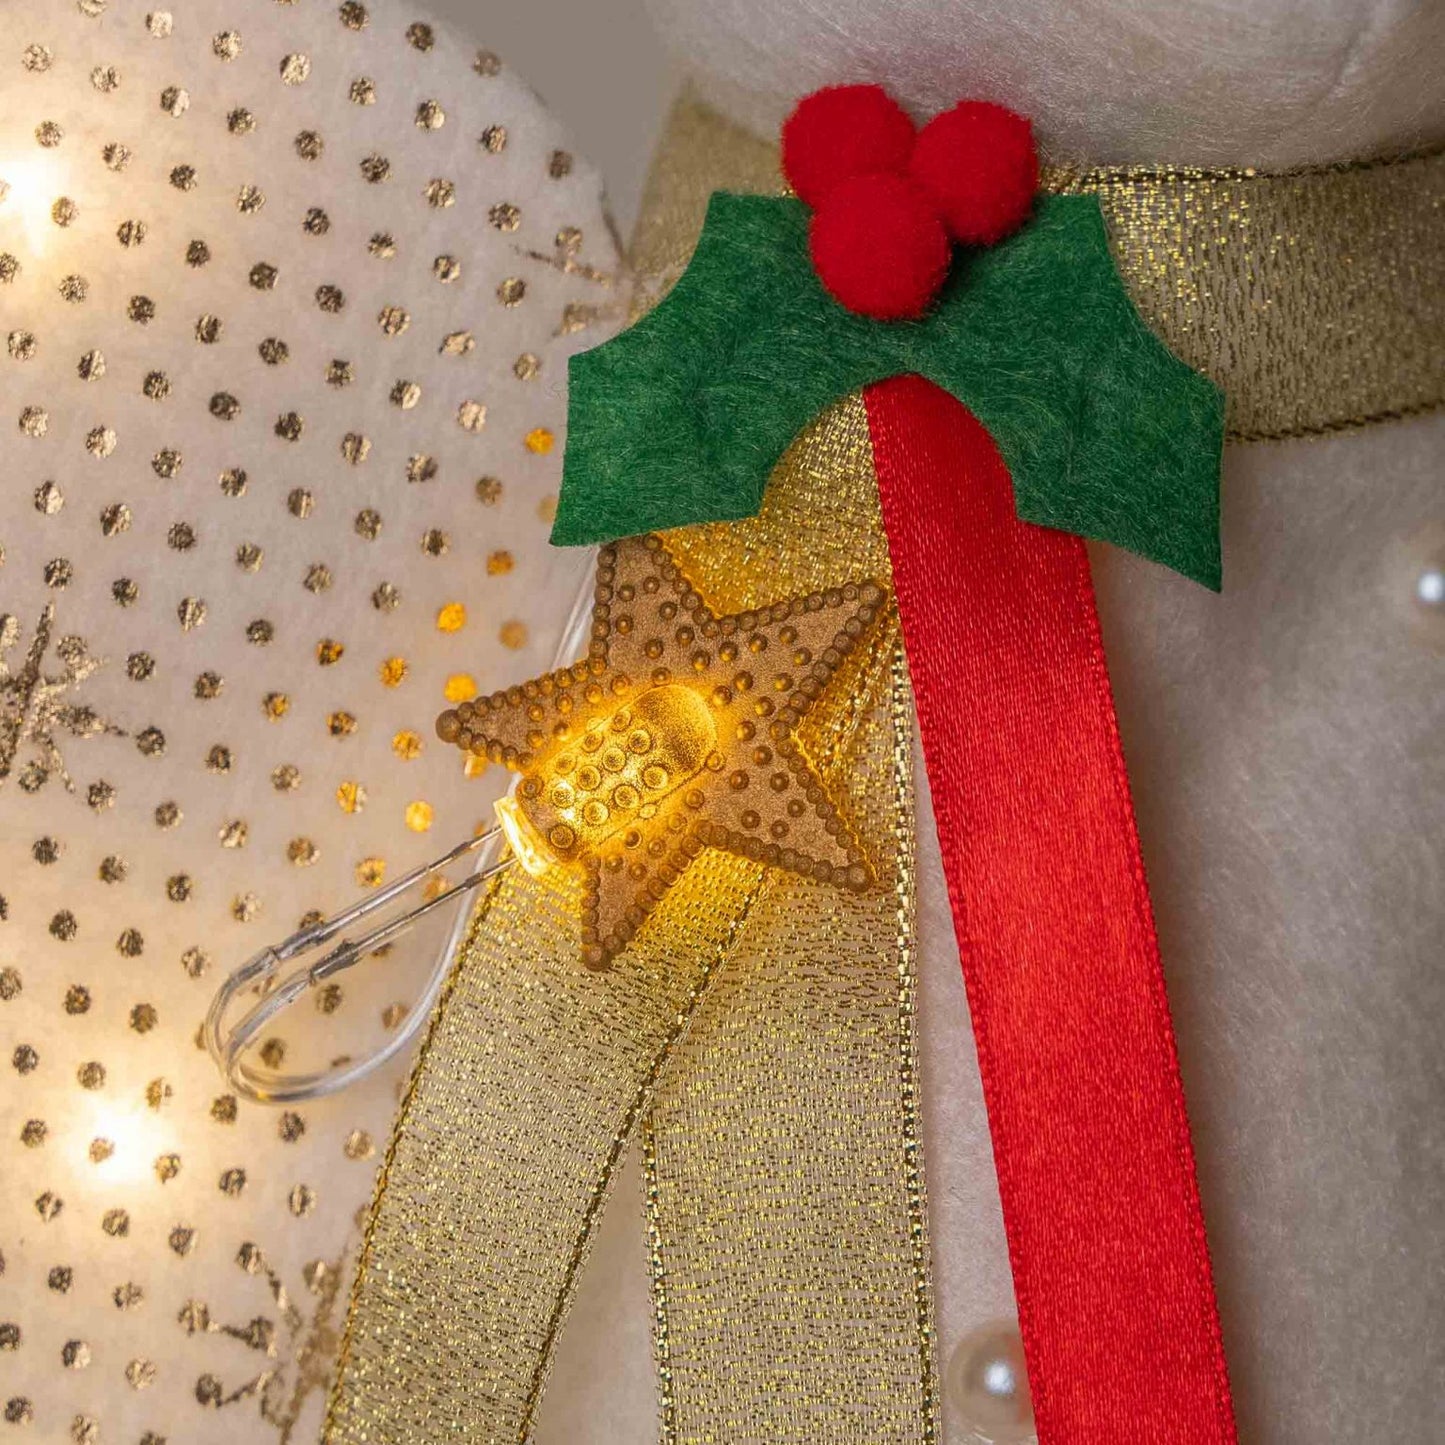 Limited Time Early Bird Offer- A ‘Christmas Miracle’ Angel Dog Tree Topper with Golden Sparkle Lighted Wings - Helps Feed 30 Hungry Shelter Dogs in Need